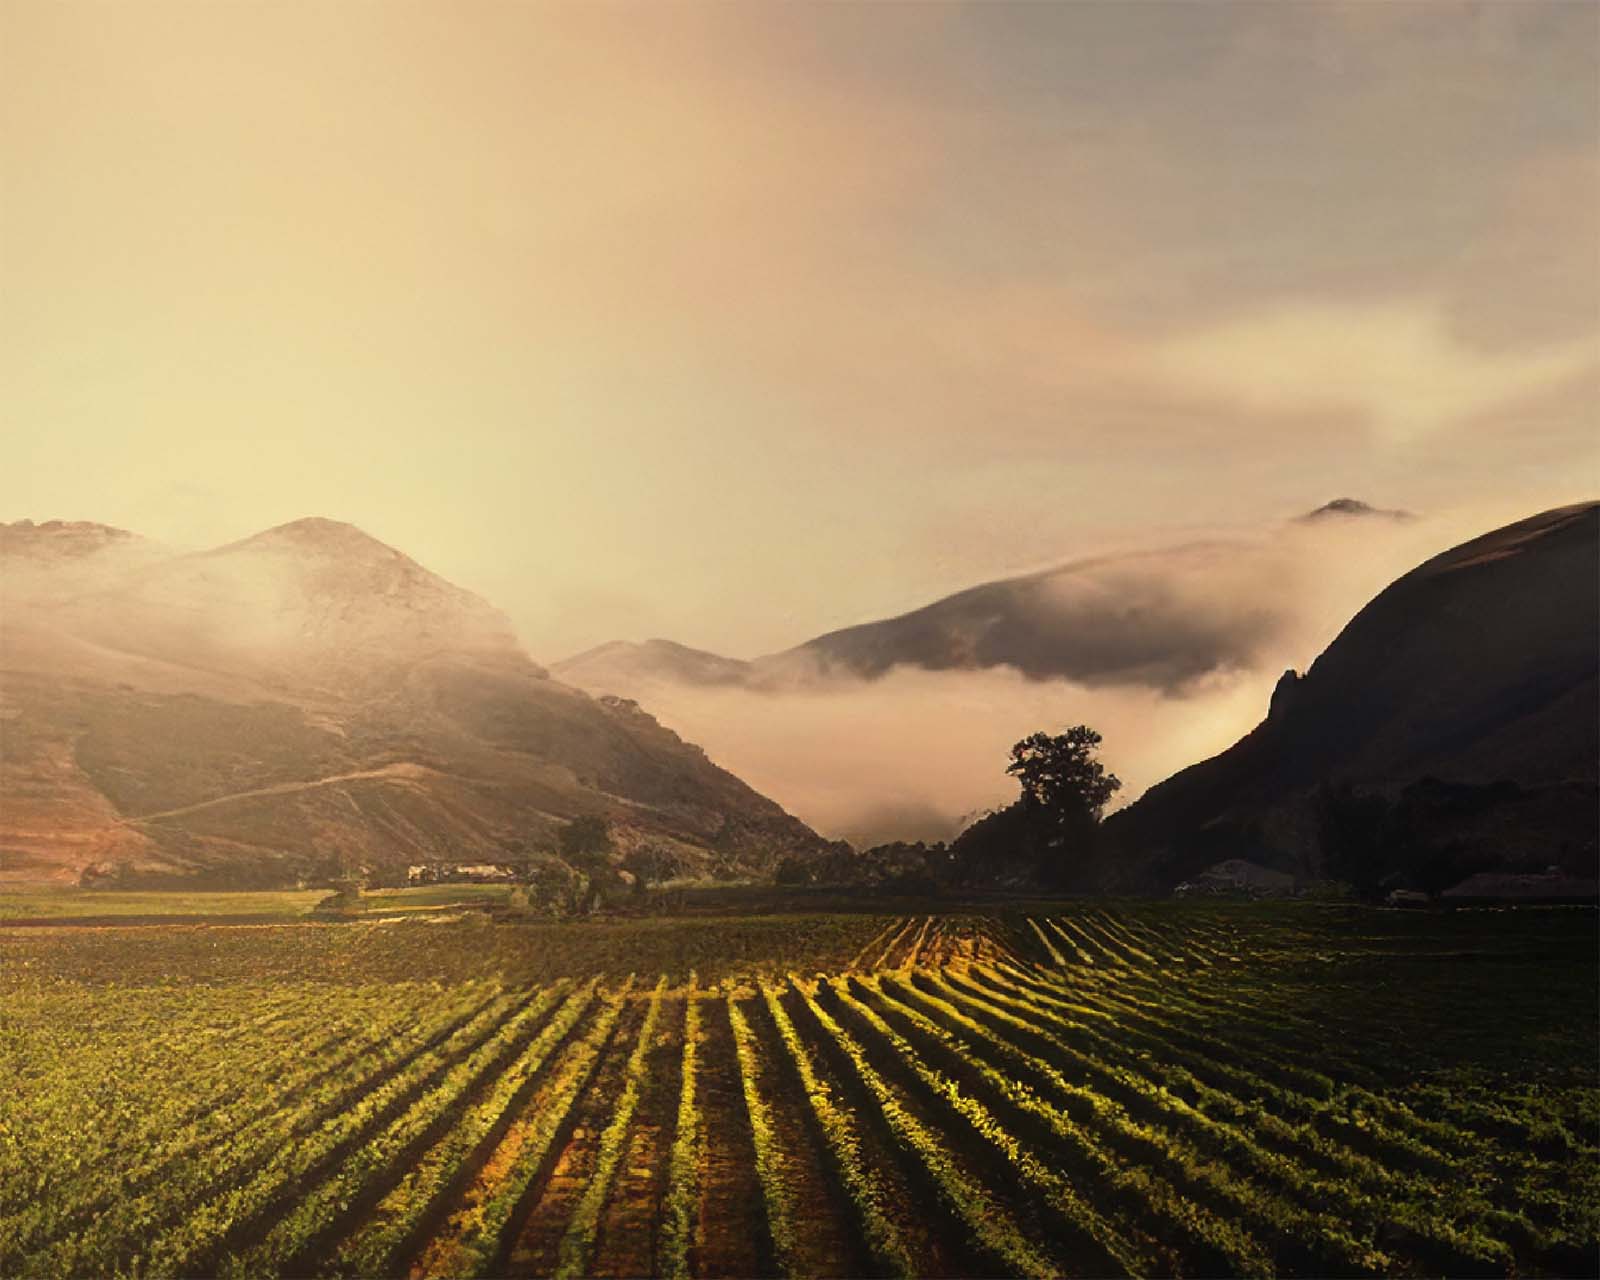 A photograph of Bien Nacido Vineyard that shows the vine rows in front of a foggy mountainous range. The sky is overcast and foggy, with clouds covering and engulfing the mountains in the background. 